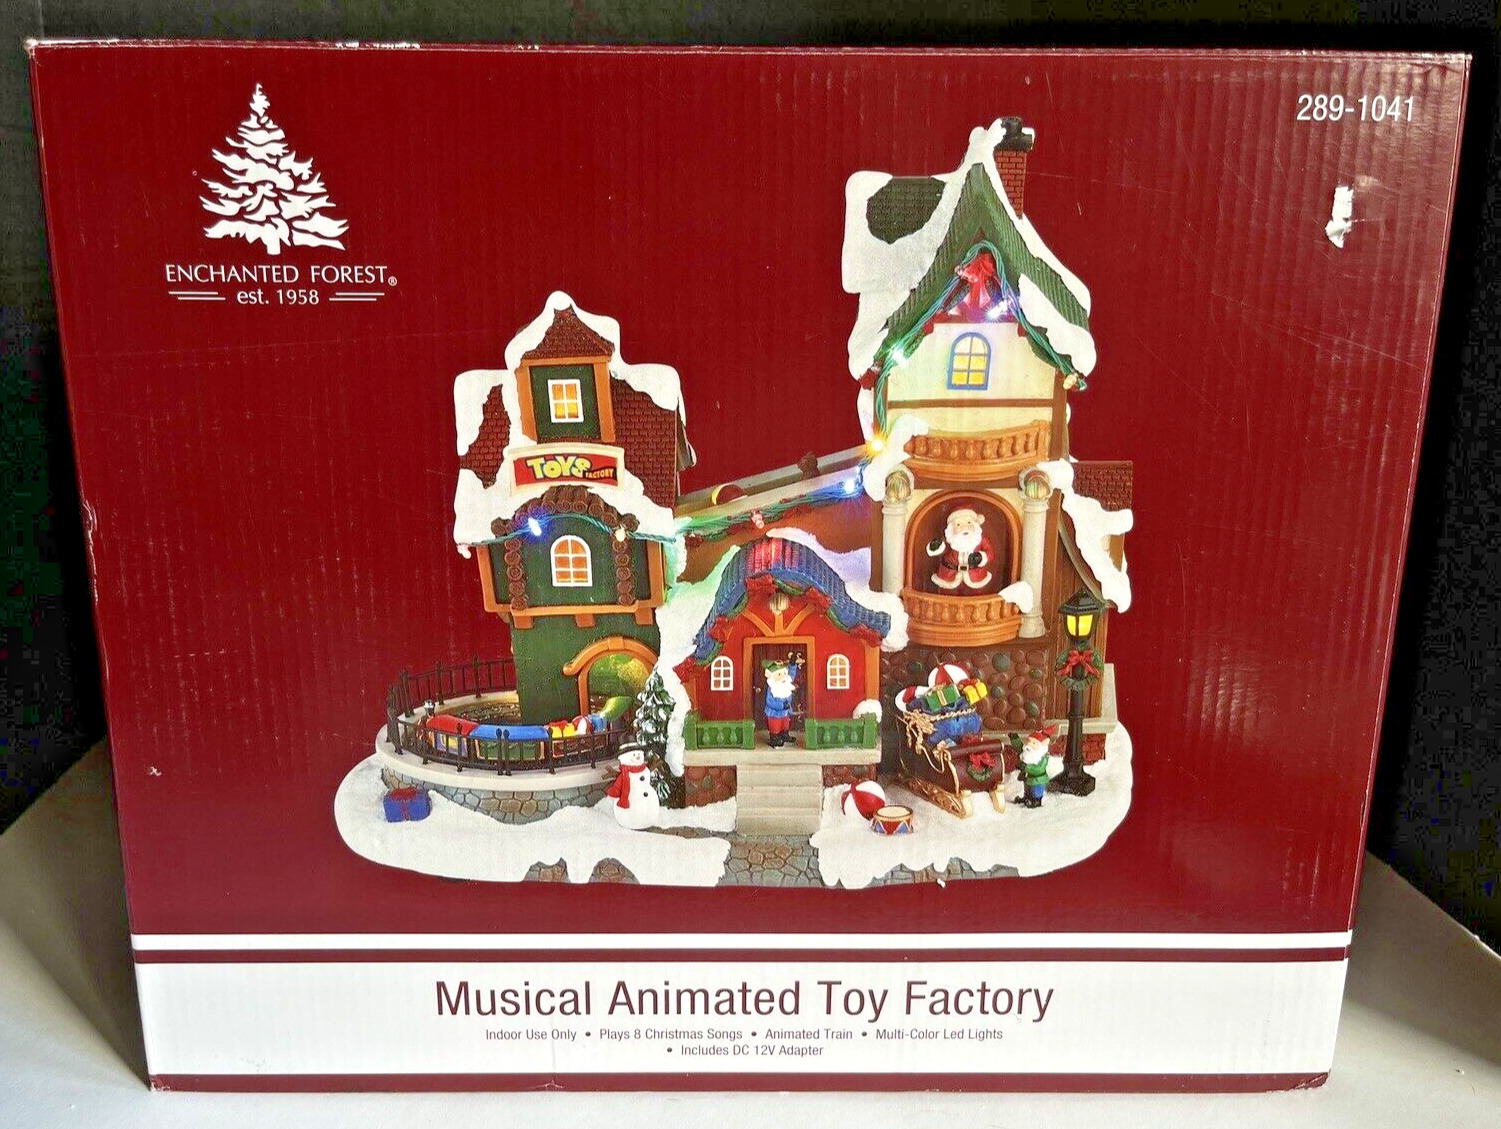 Enchanted Forest Animated Toy Factory 289-1041 Train Lighted Original Box